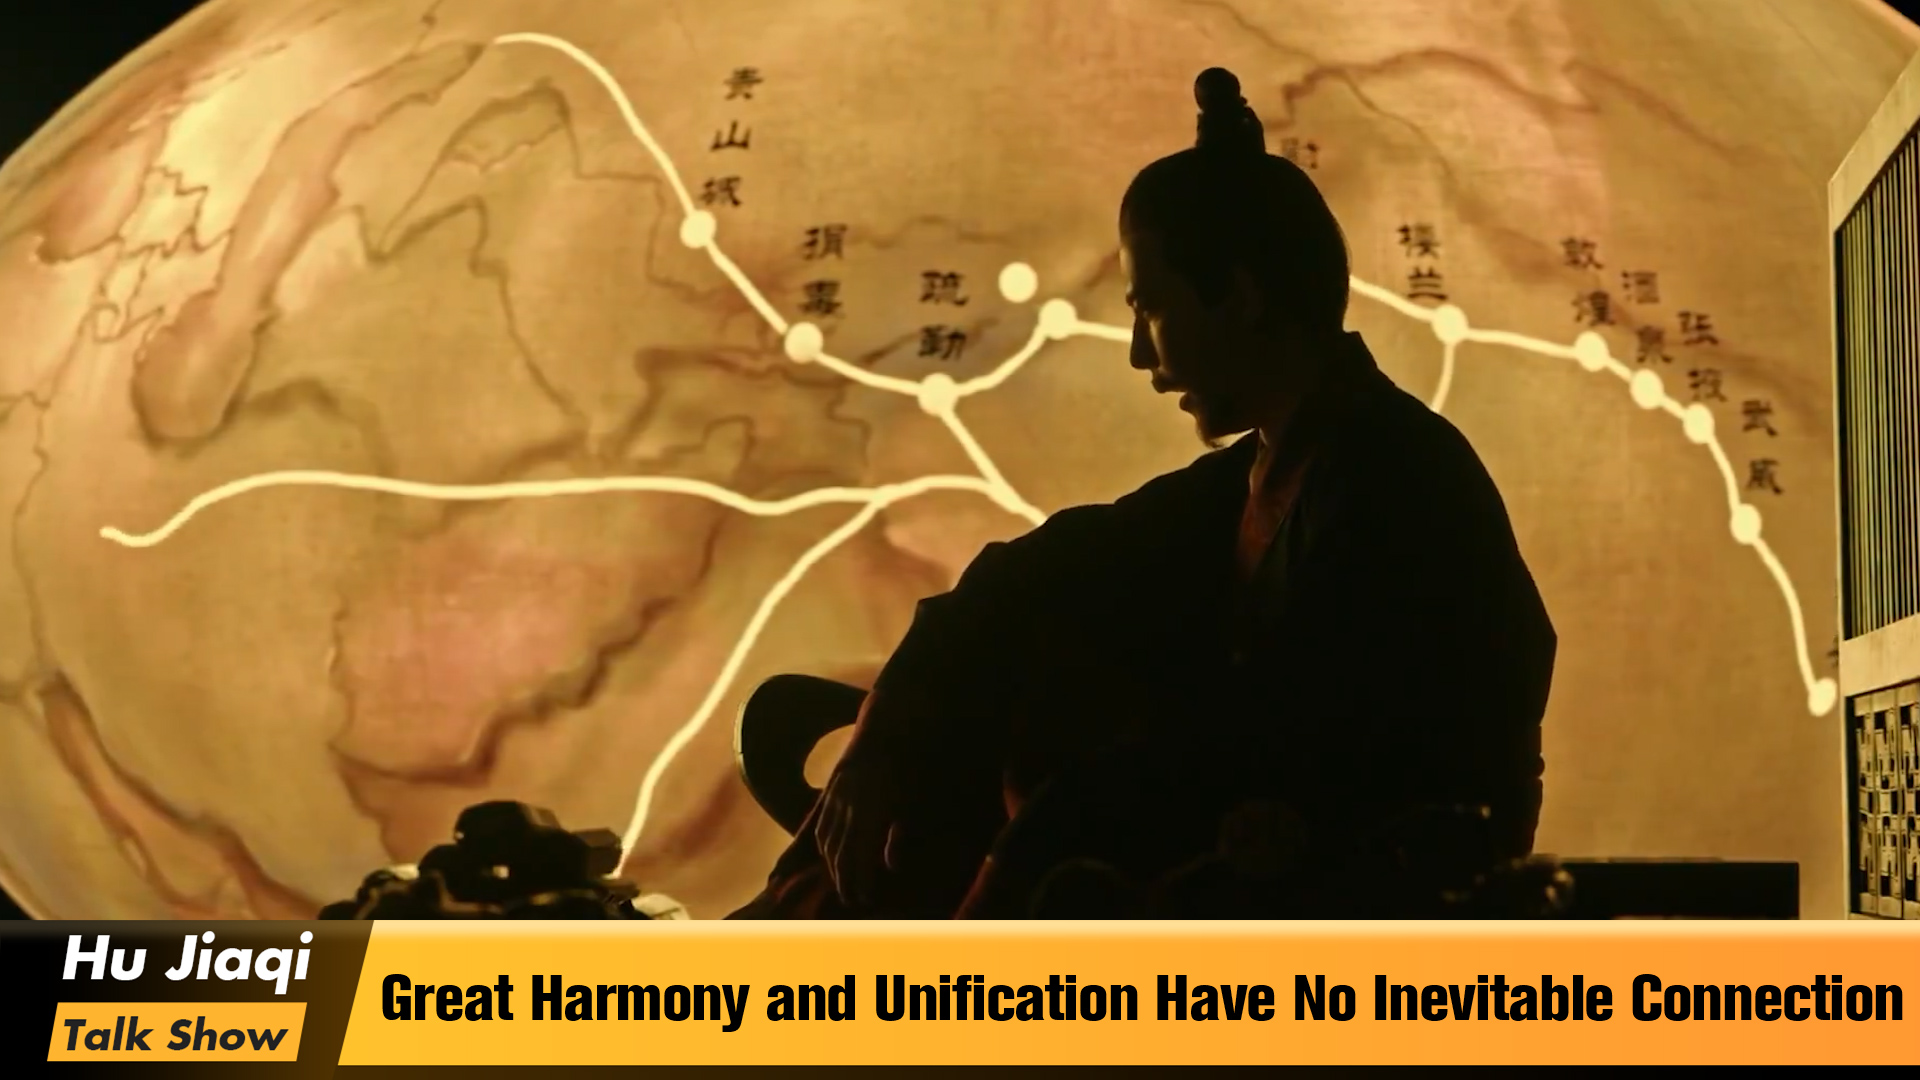 Great Harmony and Unification Have No Inevitable Connection